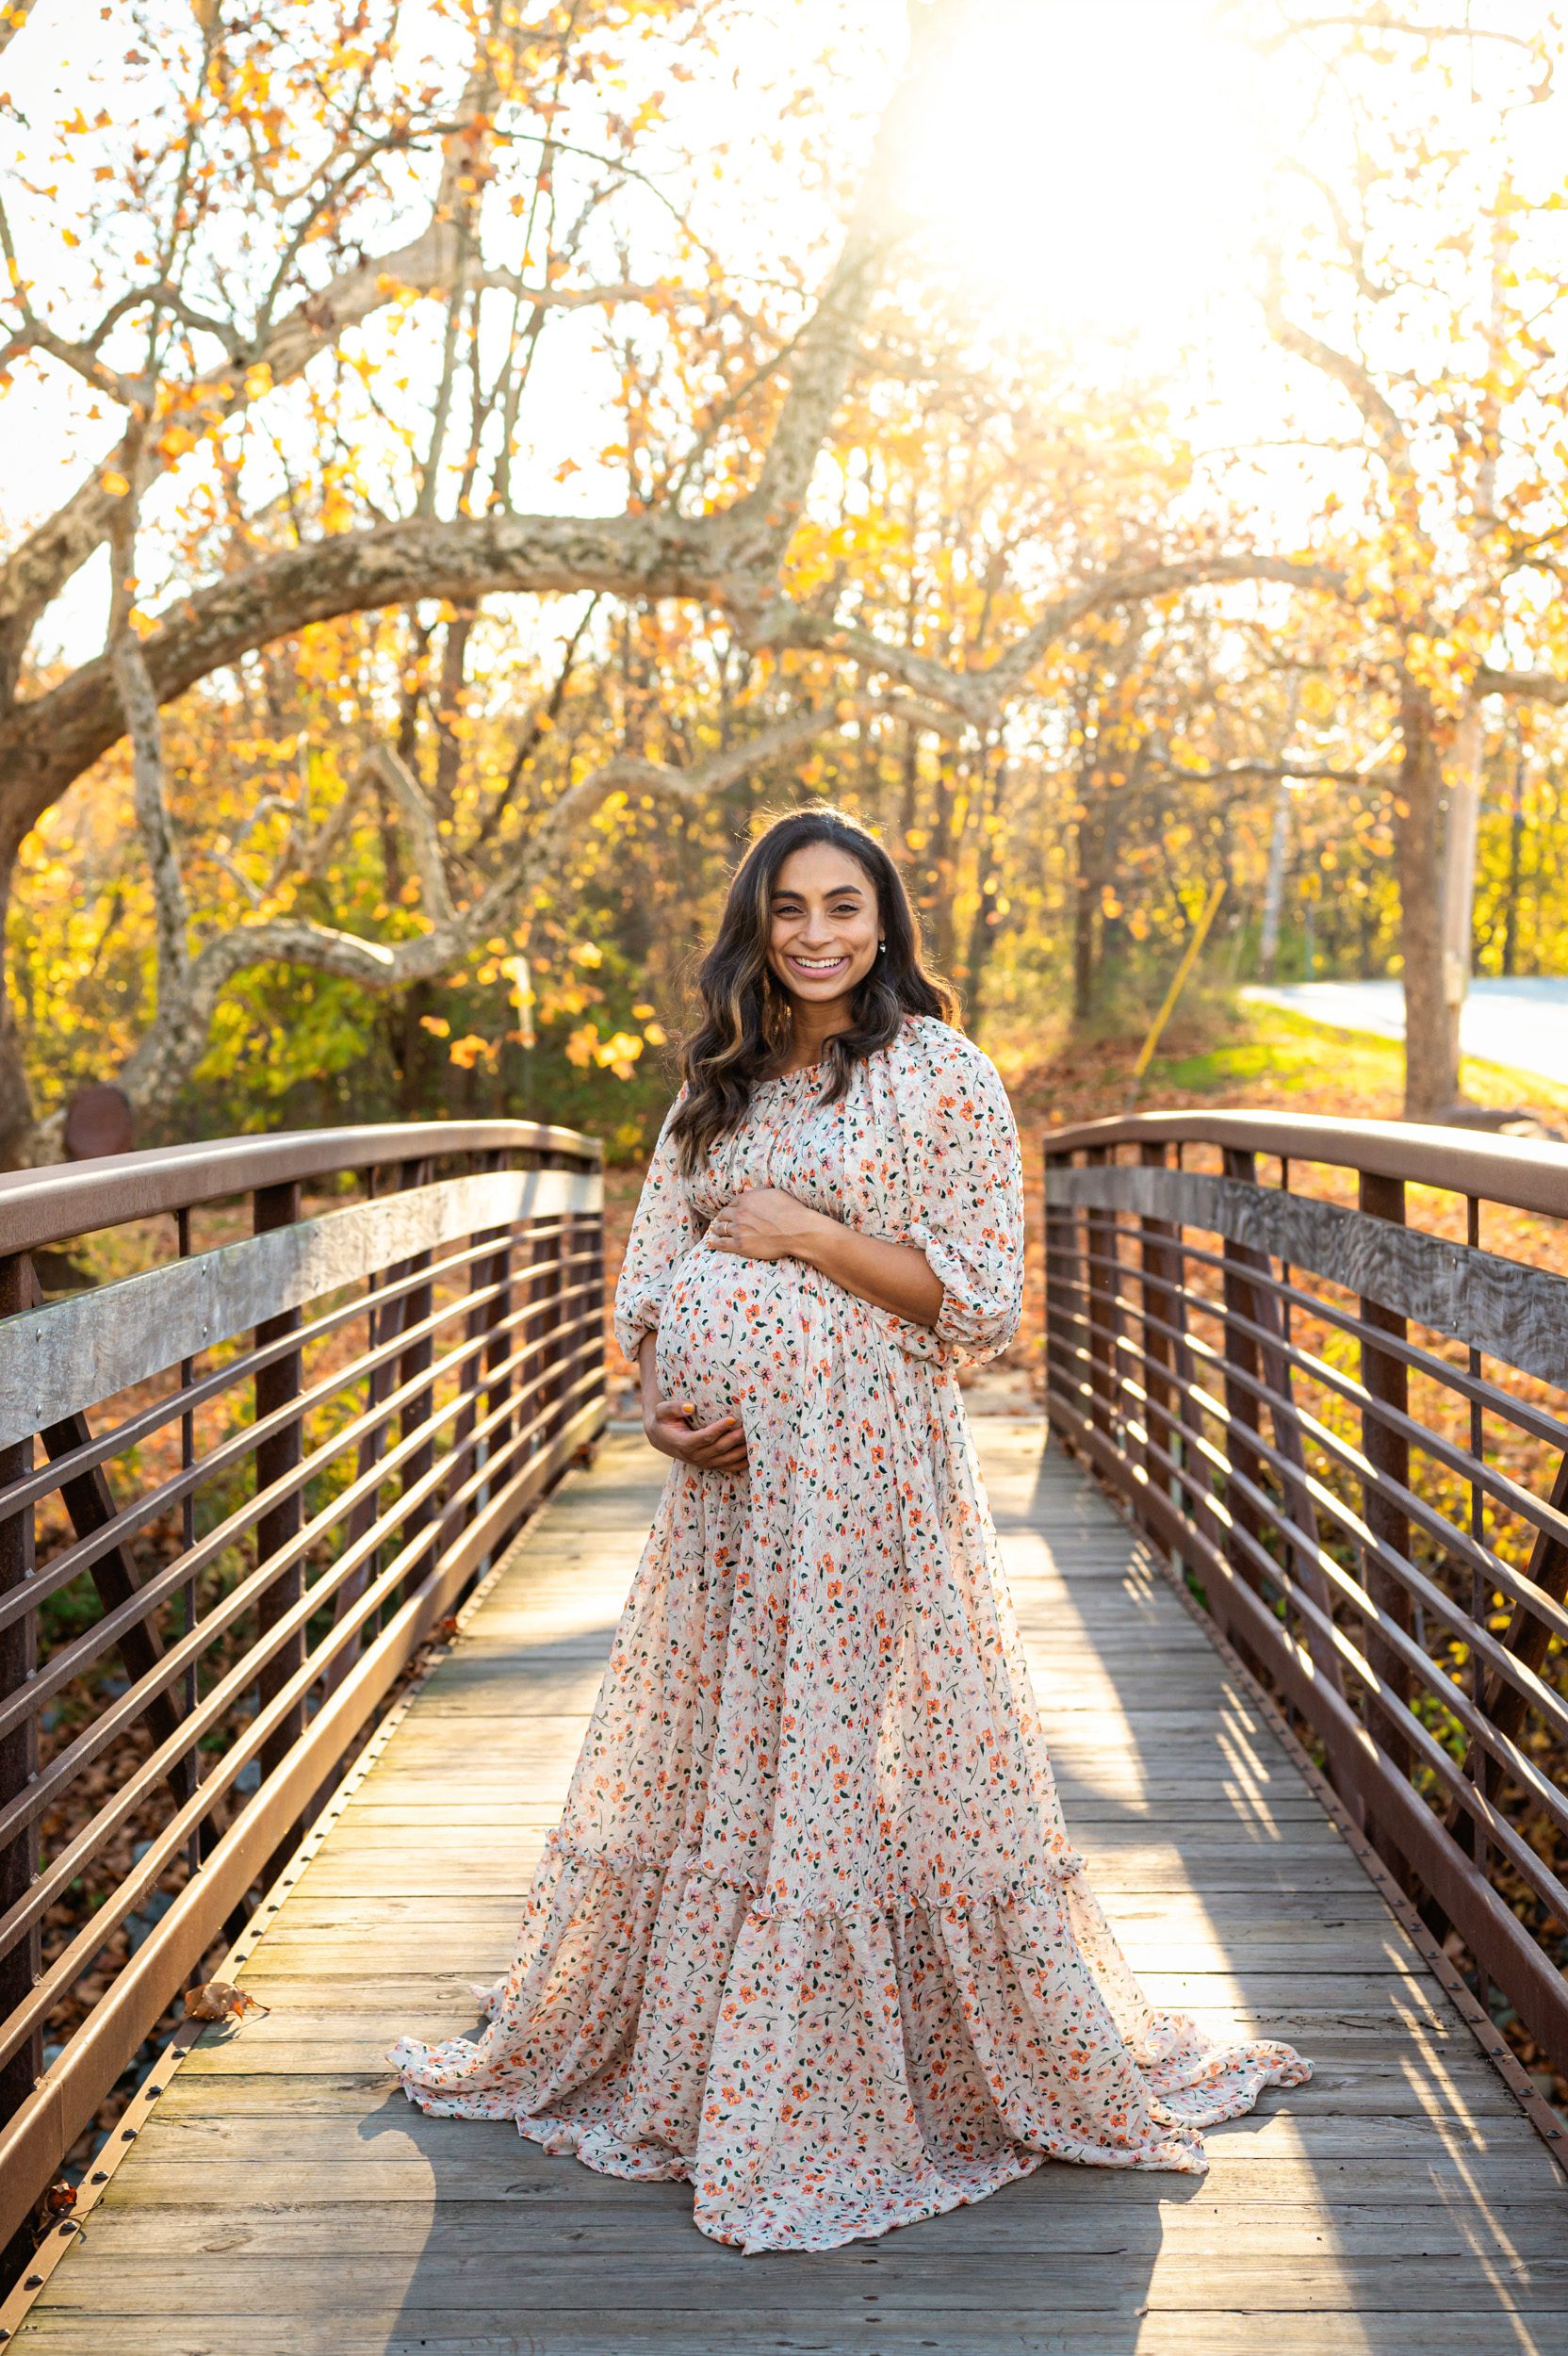 an expecting mother wearing a floral dress standing on a bridge and smiling at the camera with the sunset shining through the colorful fall leaves in the background during a maternity photoshoot